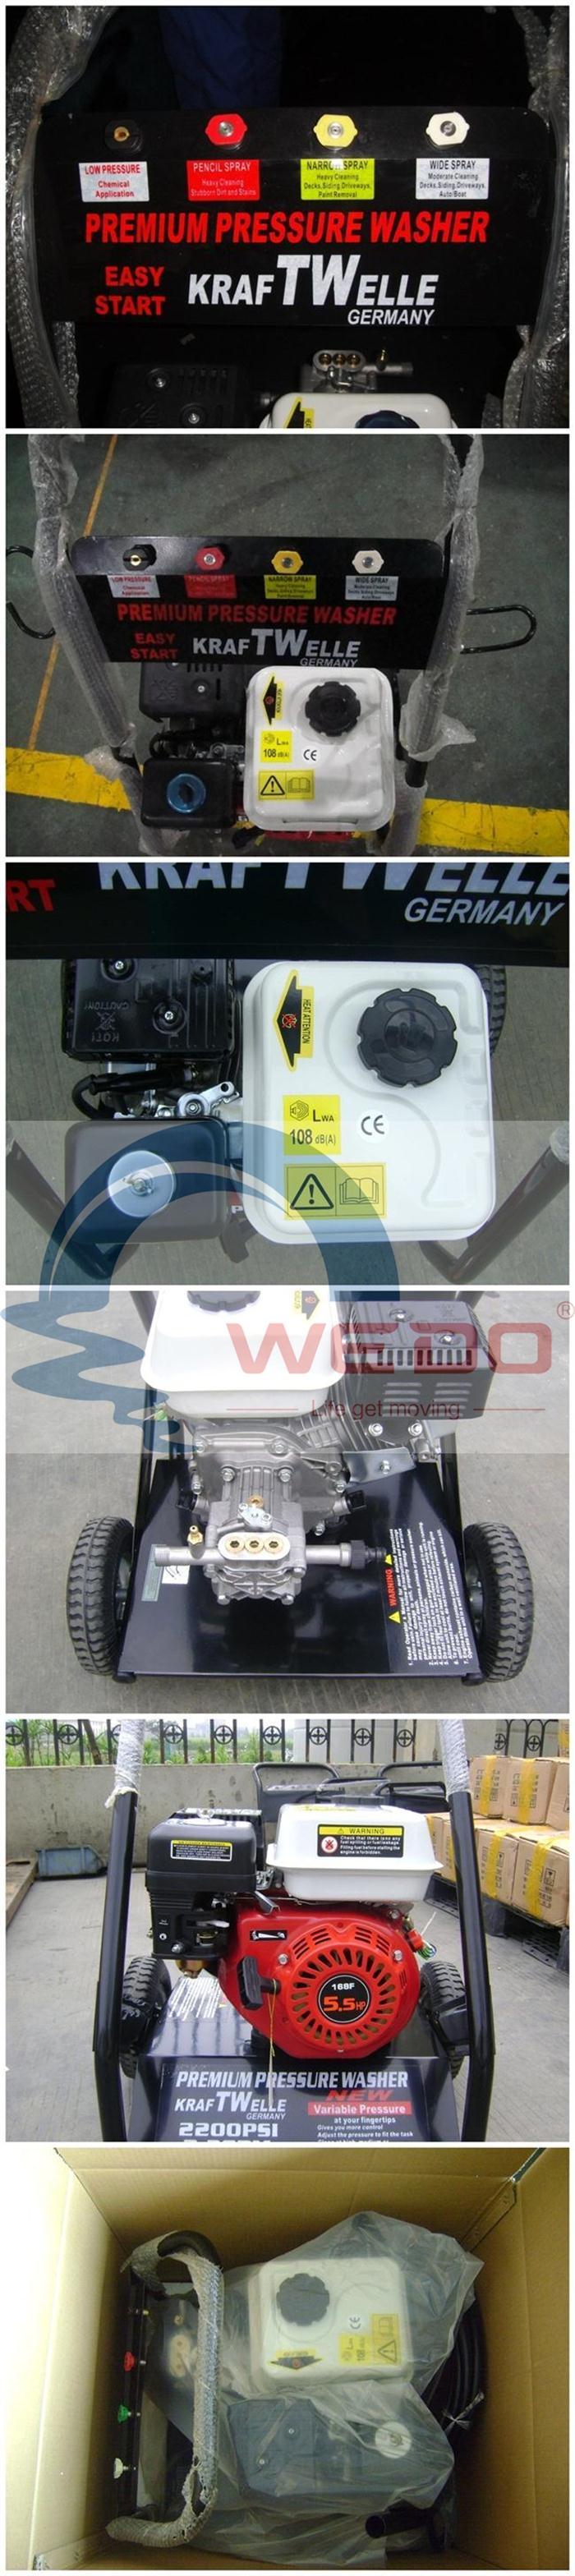 Wdpw170 Household and Industrial 5.5HP/6.5HP Gaoline Engine High Pressure Washer/Cleaner